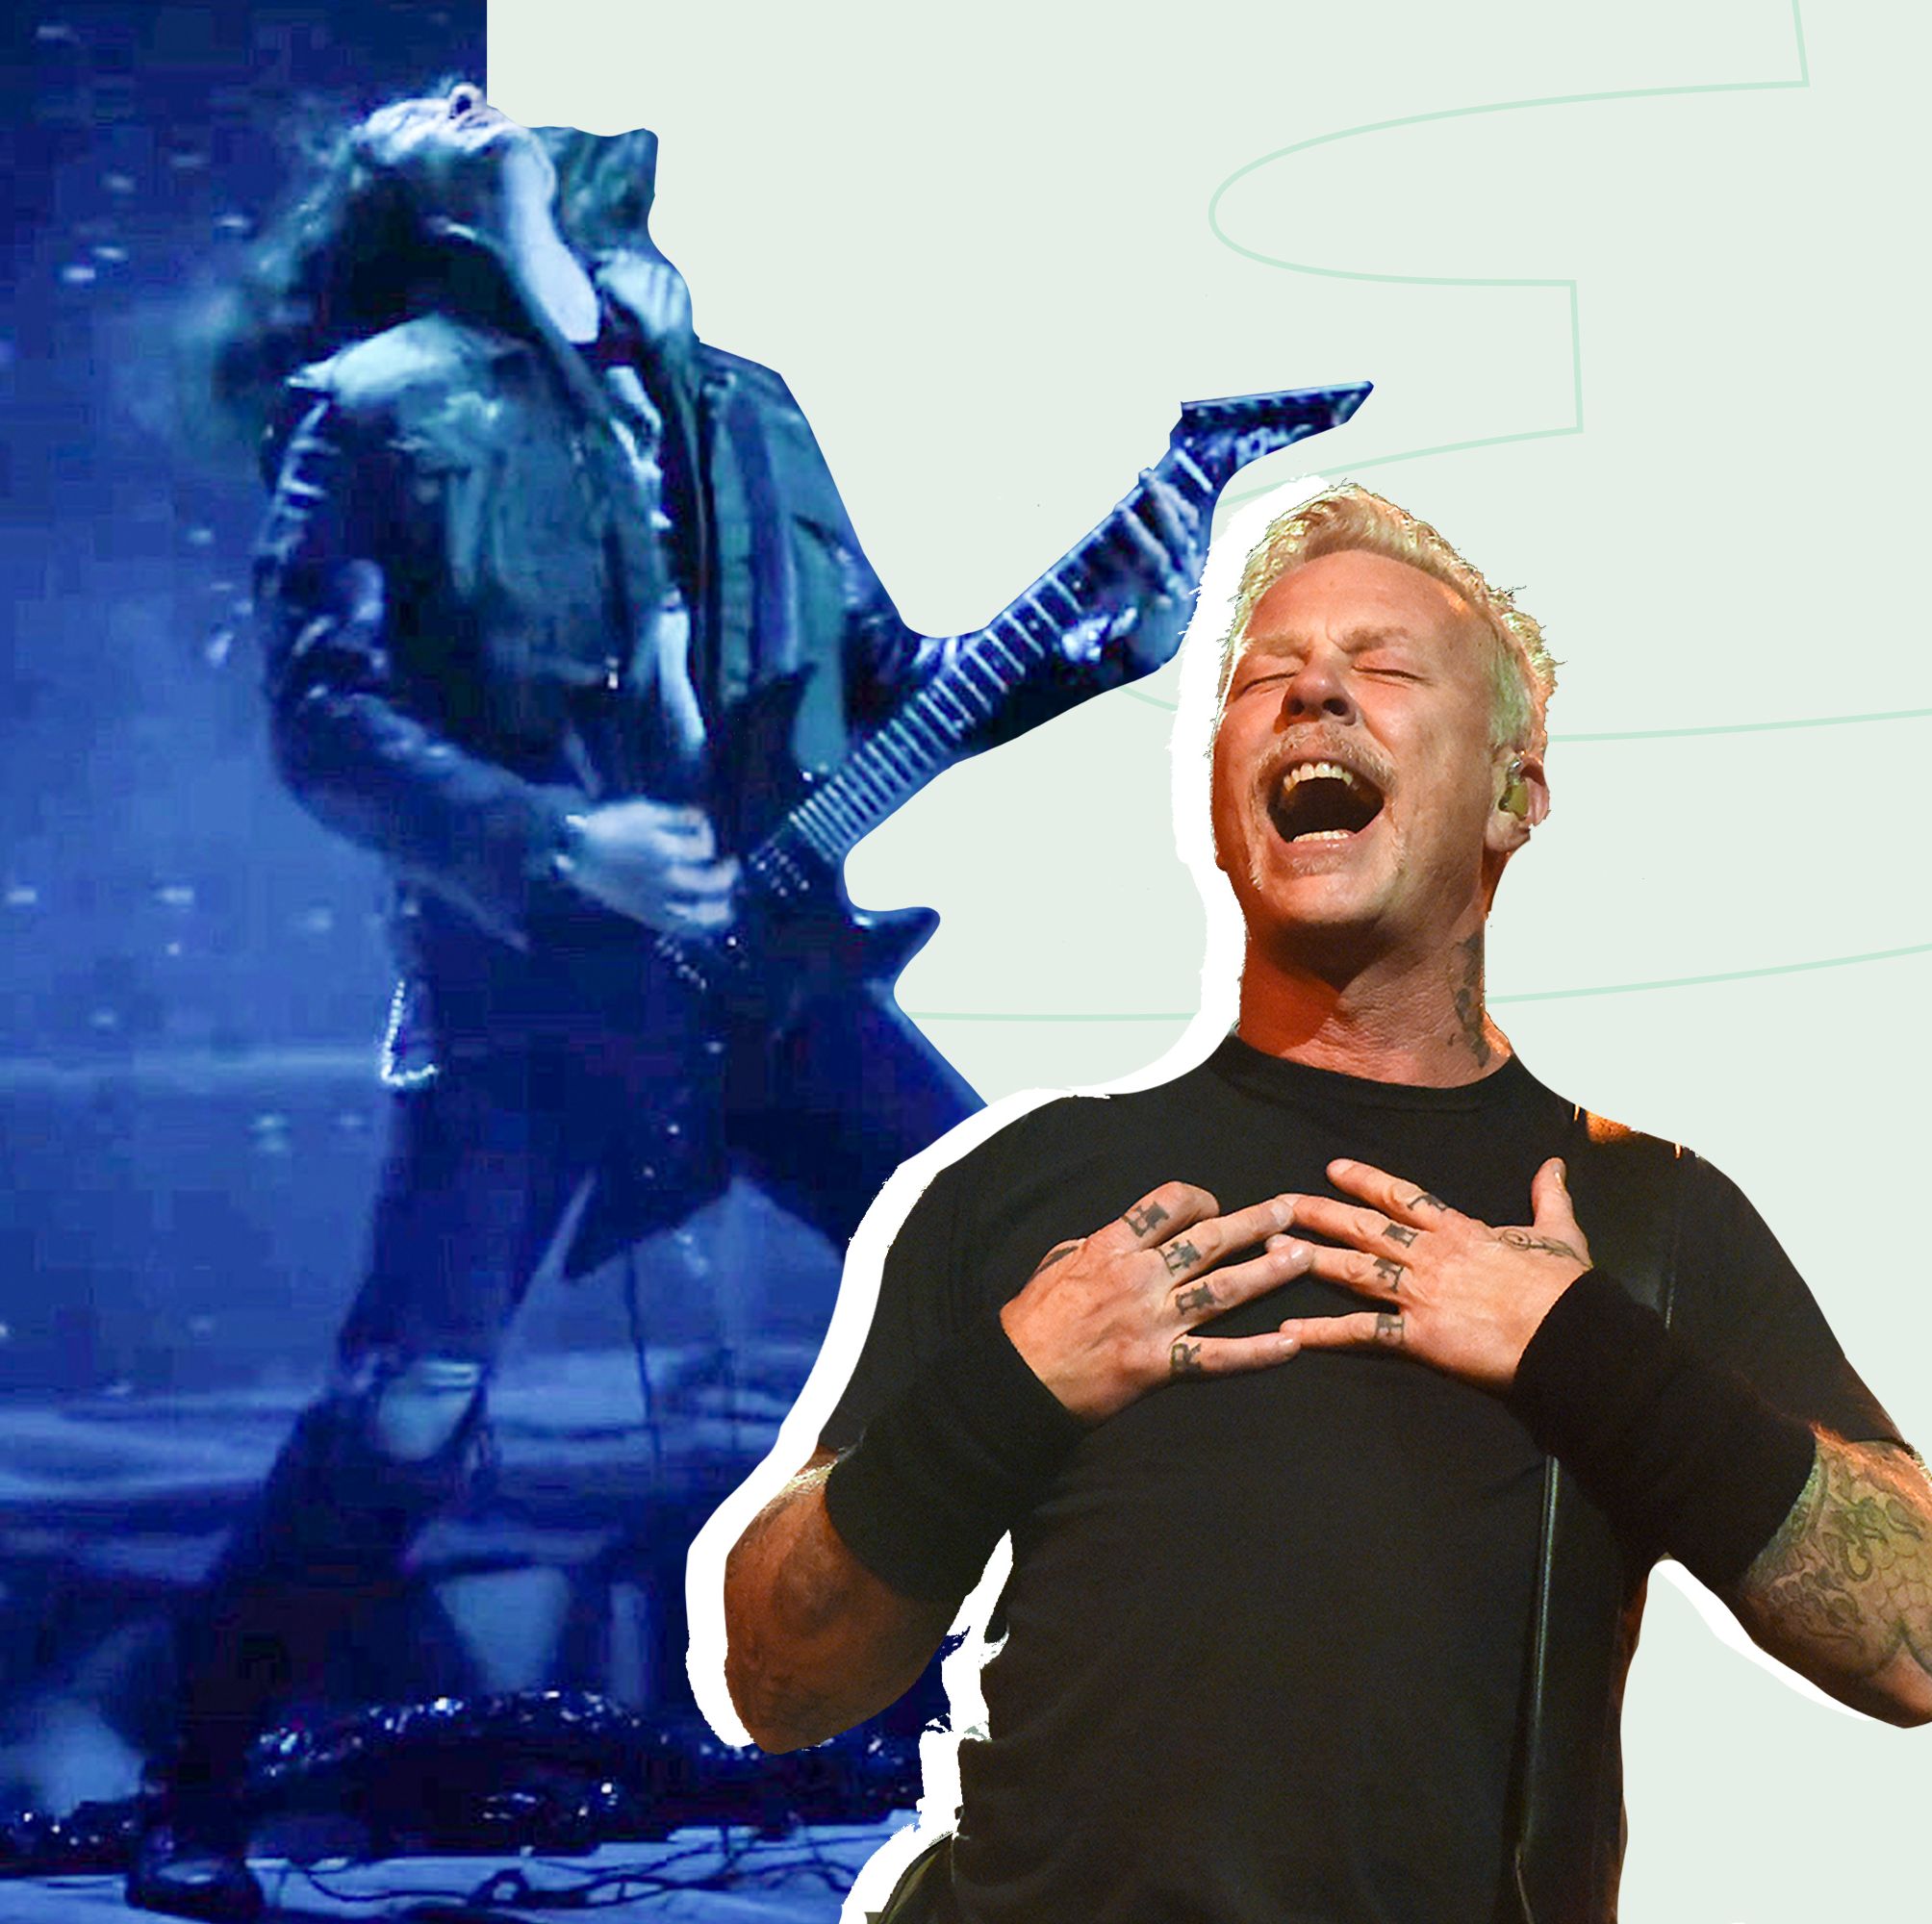 Metallica Throws Up Metal Horns for Their 'Stranger Things' Moment